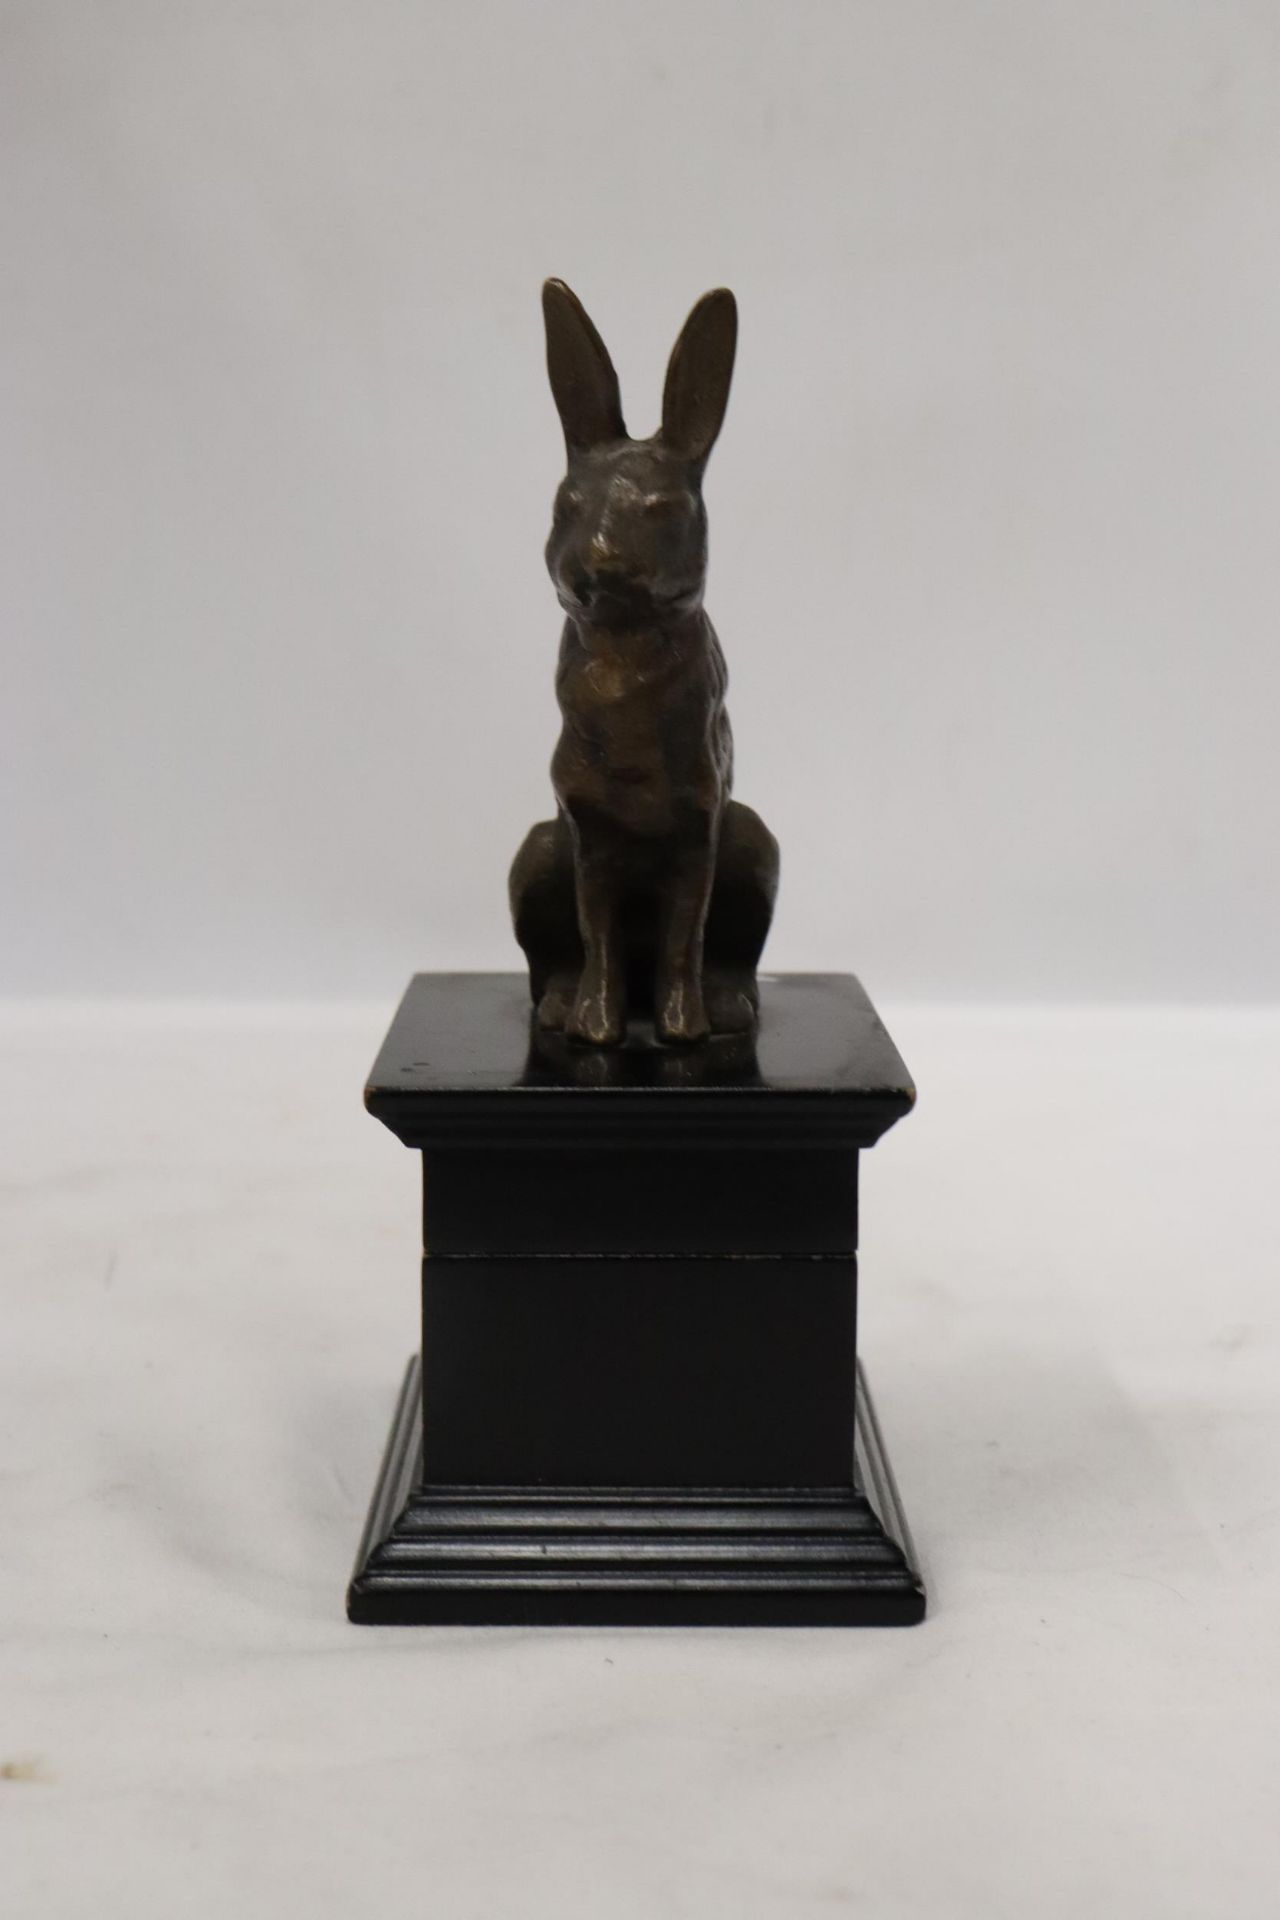 A FIGURE OF A HARE SITTING ON A WOODEN TRINKET BOX - Image 2 of 6